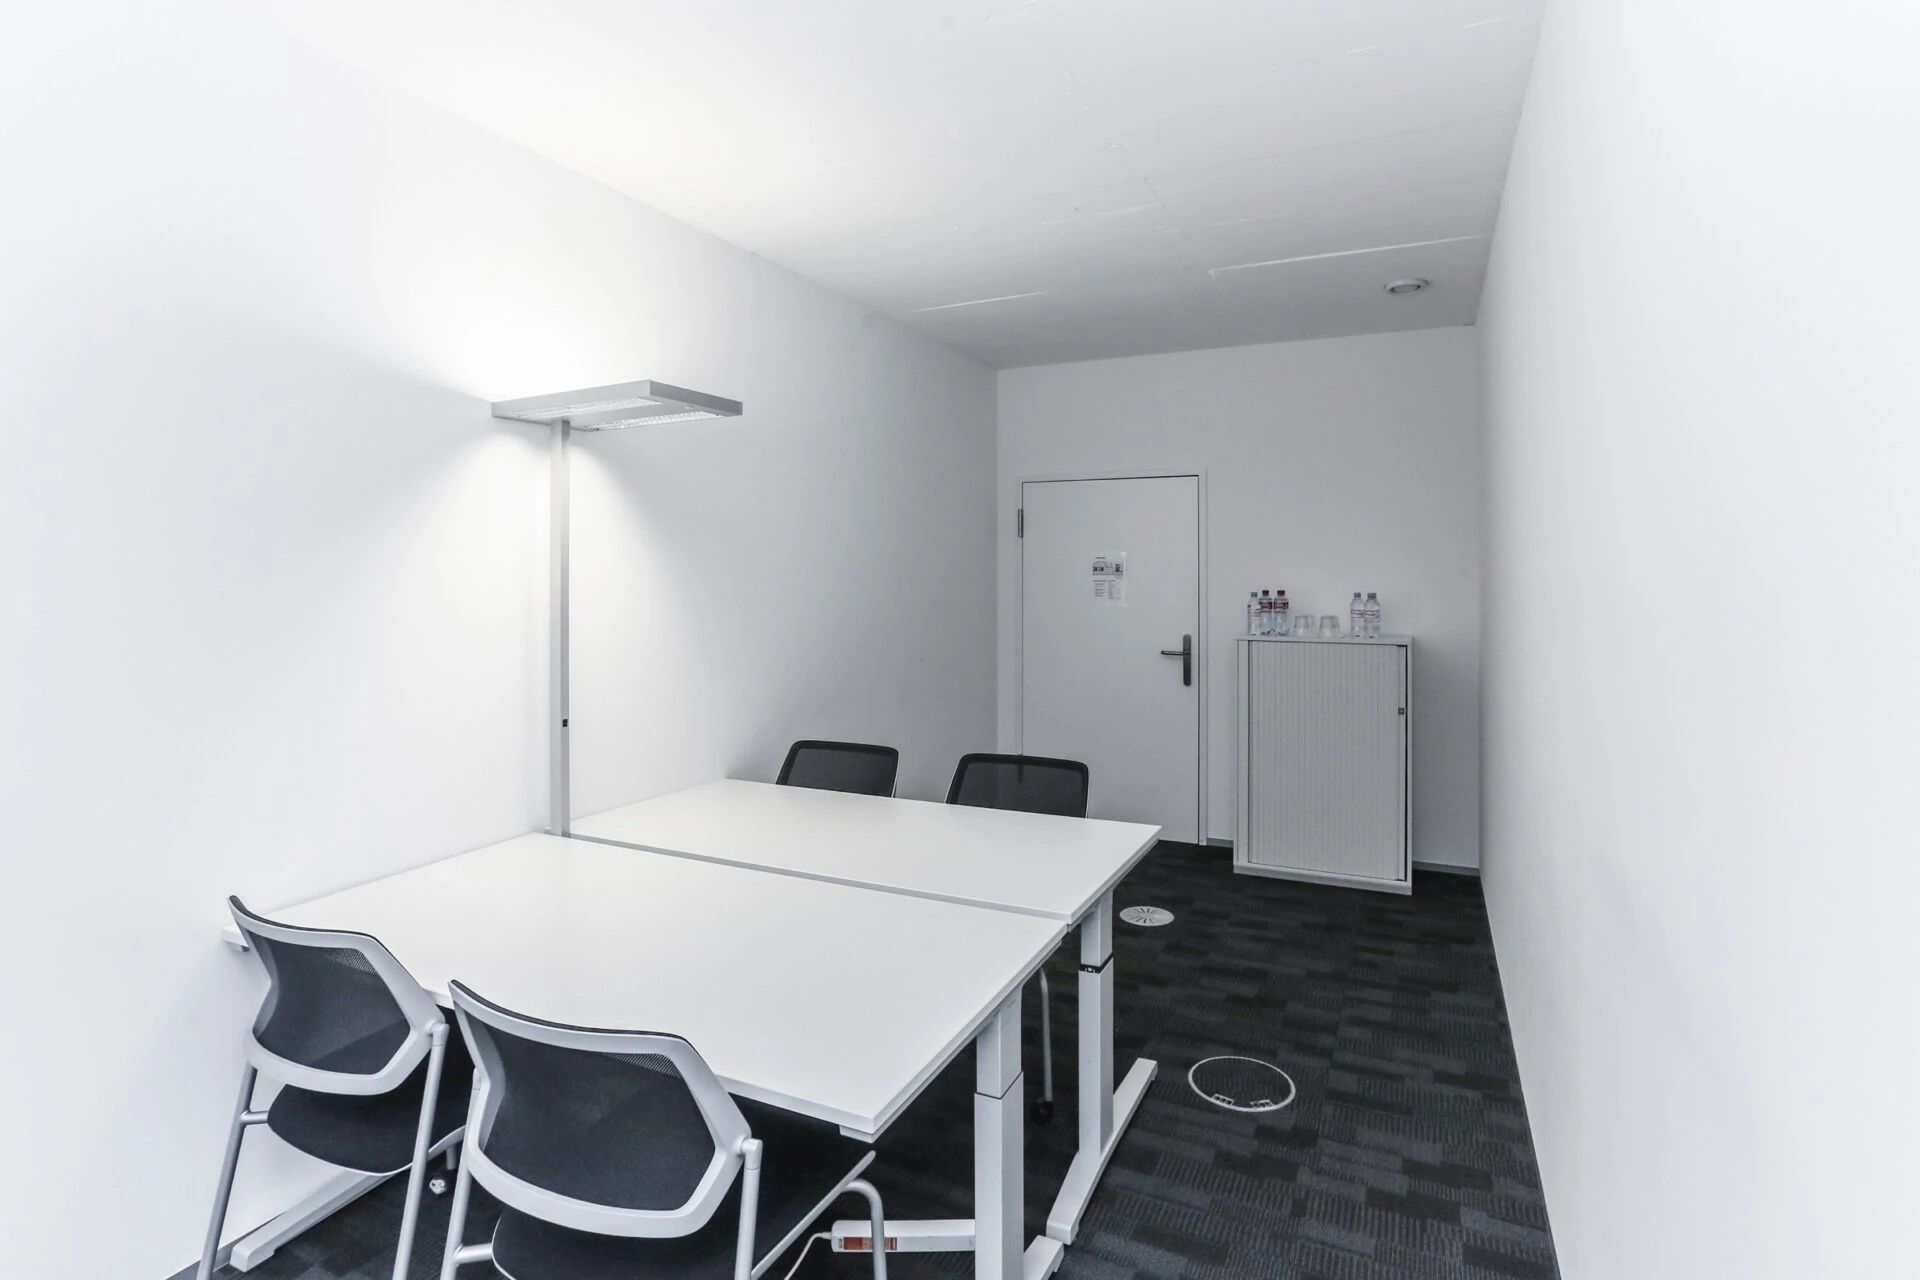 Small meeting room for 4 